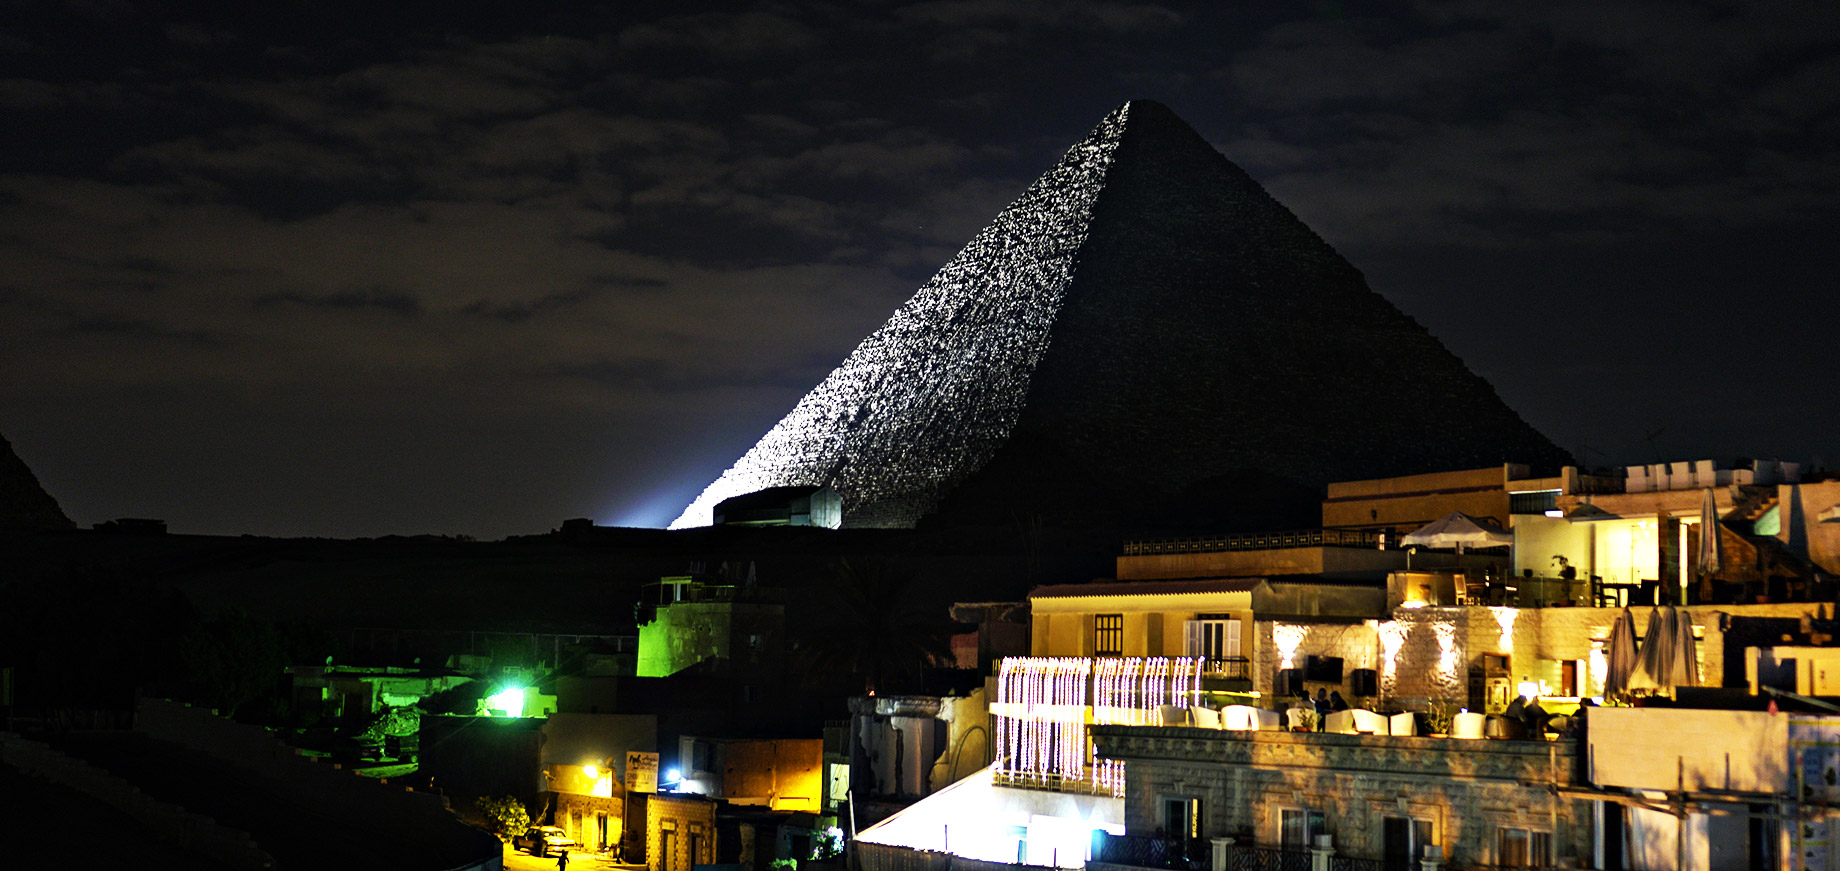 The Great Pyramids of Giza by Night - Egypt